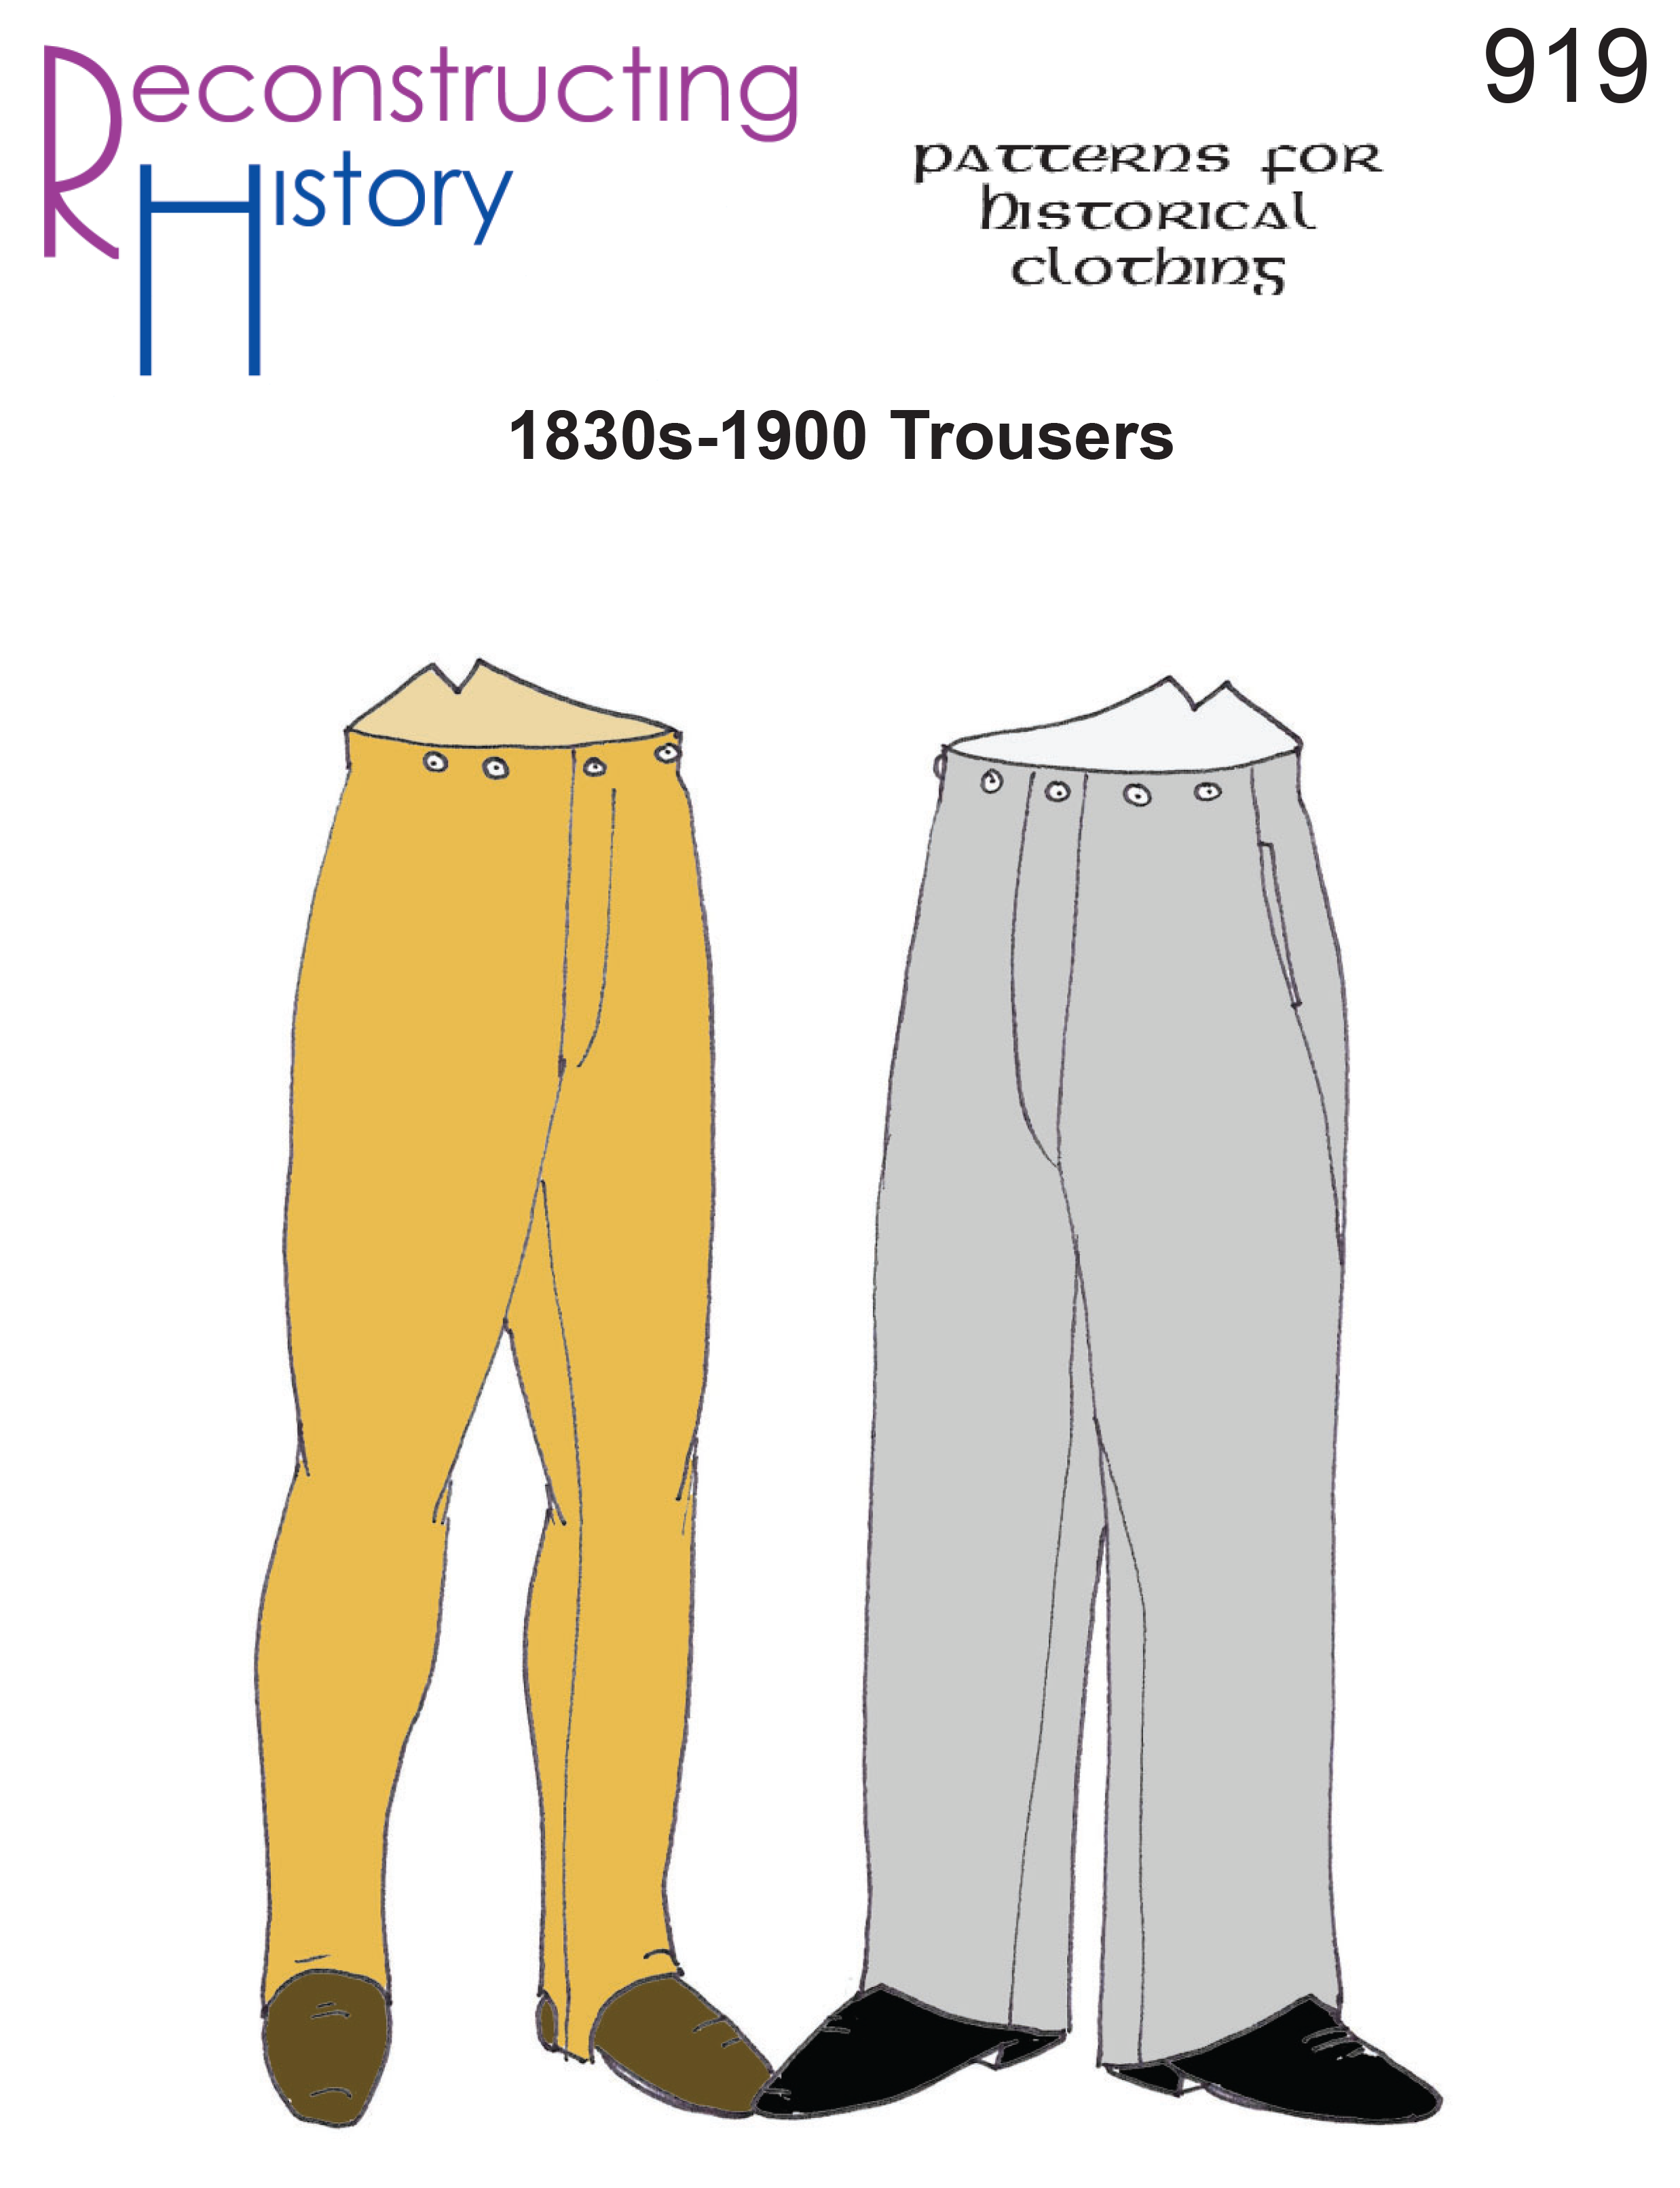 RH1401 — 1940s (or WW2) Men's Dress Trousers sewing pattern –  Reconstructing History